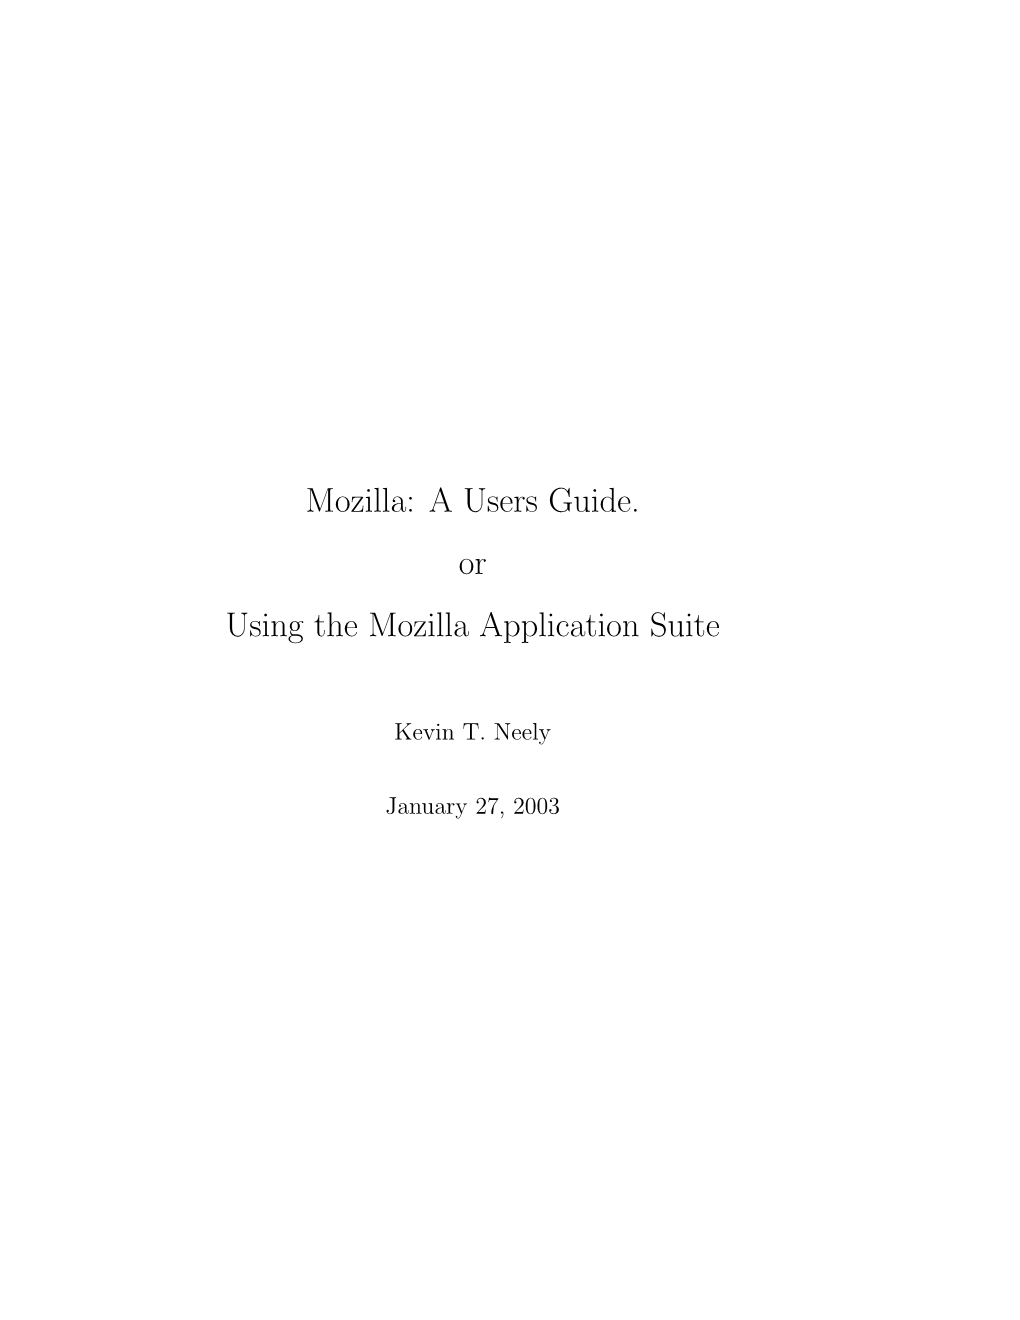 Mozilla: a Users Guide. Or Using the Mozilla Application Suite